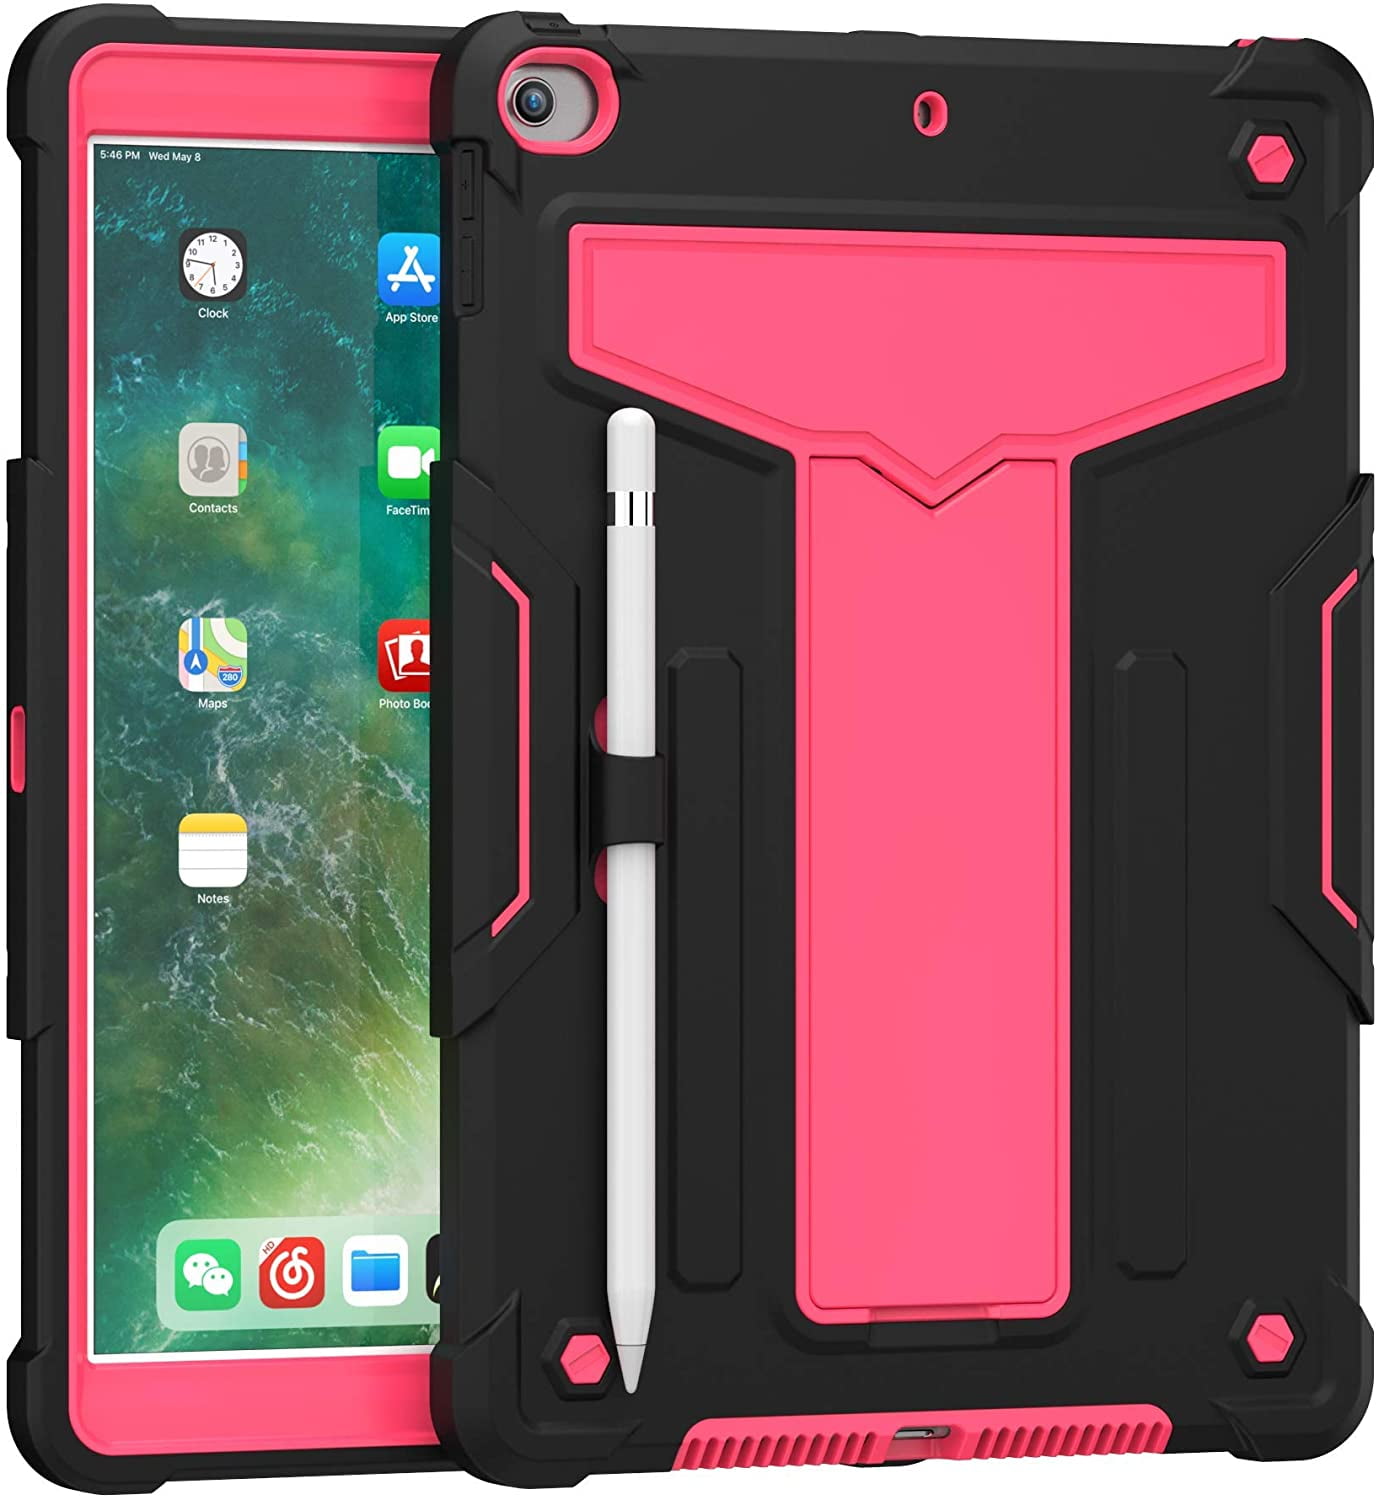 EpicGadget Case for iPad 10.2 (9th/8th/7th Gen) Protective Rugged Hybrid Case With Kickstand Pencil Holder Cover for Apple 10.2 Inch iPad 9th/8th/7th Generation 2021/2020/2019 Release (Black/Pink)